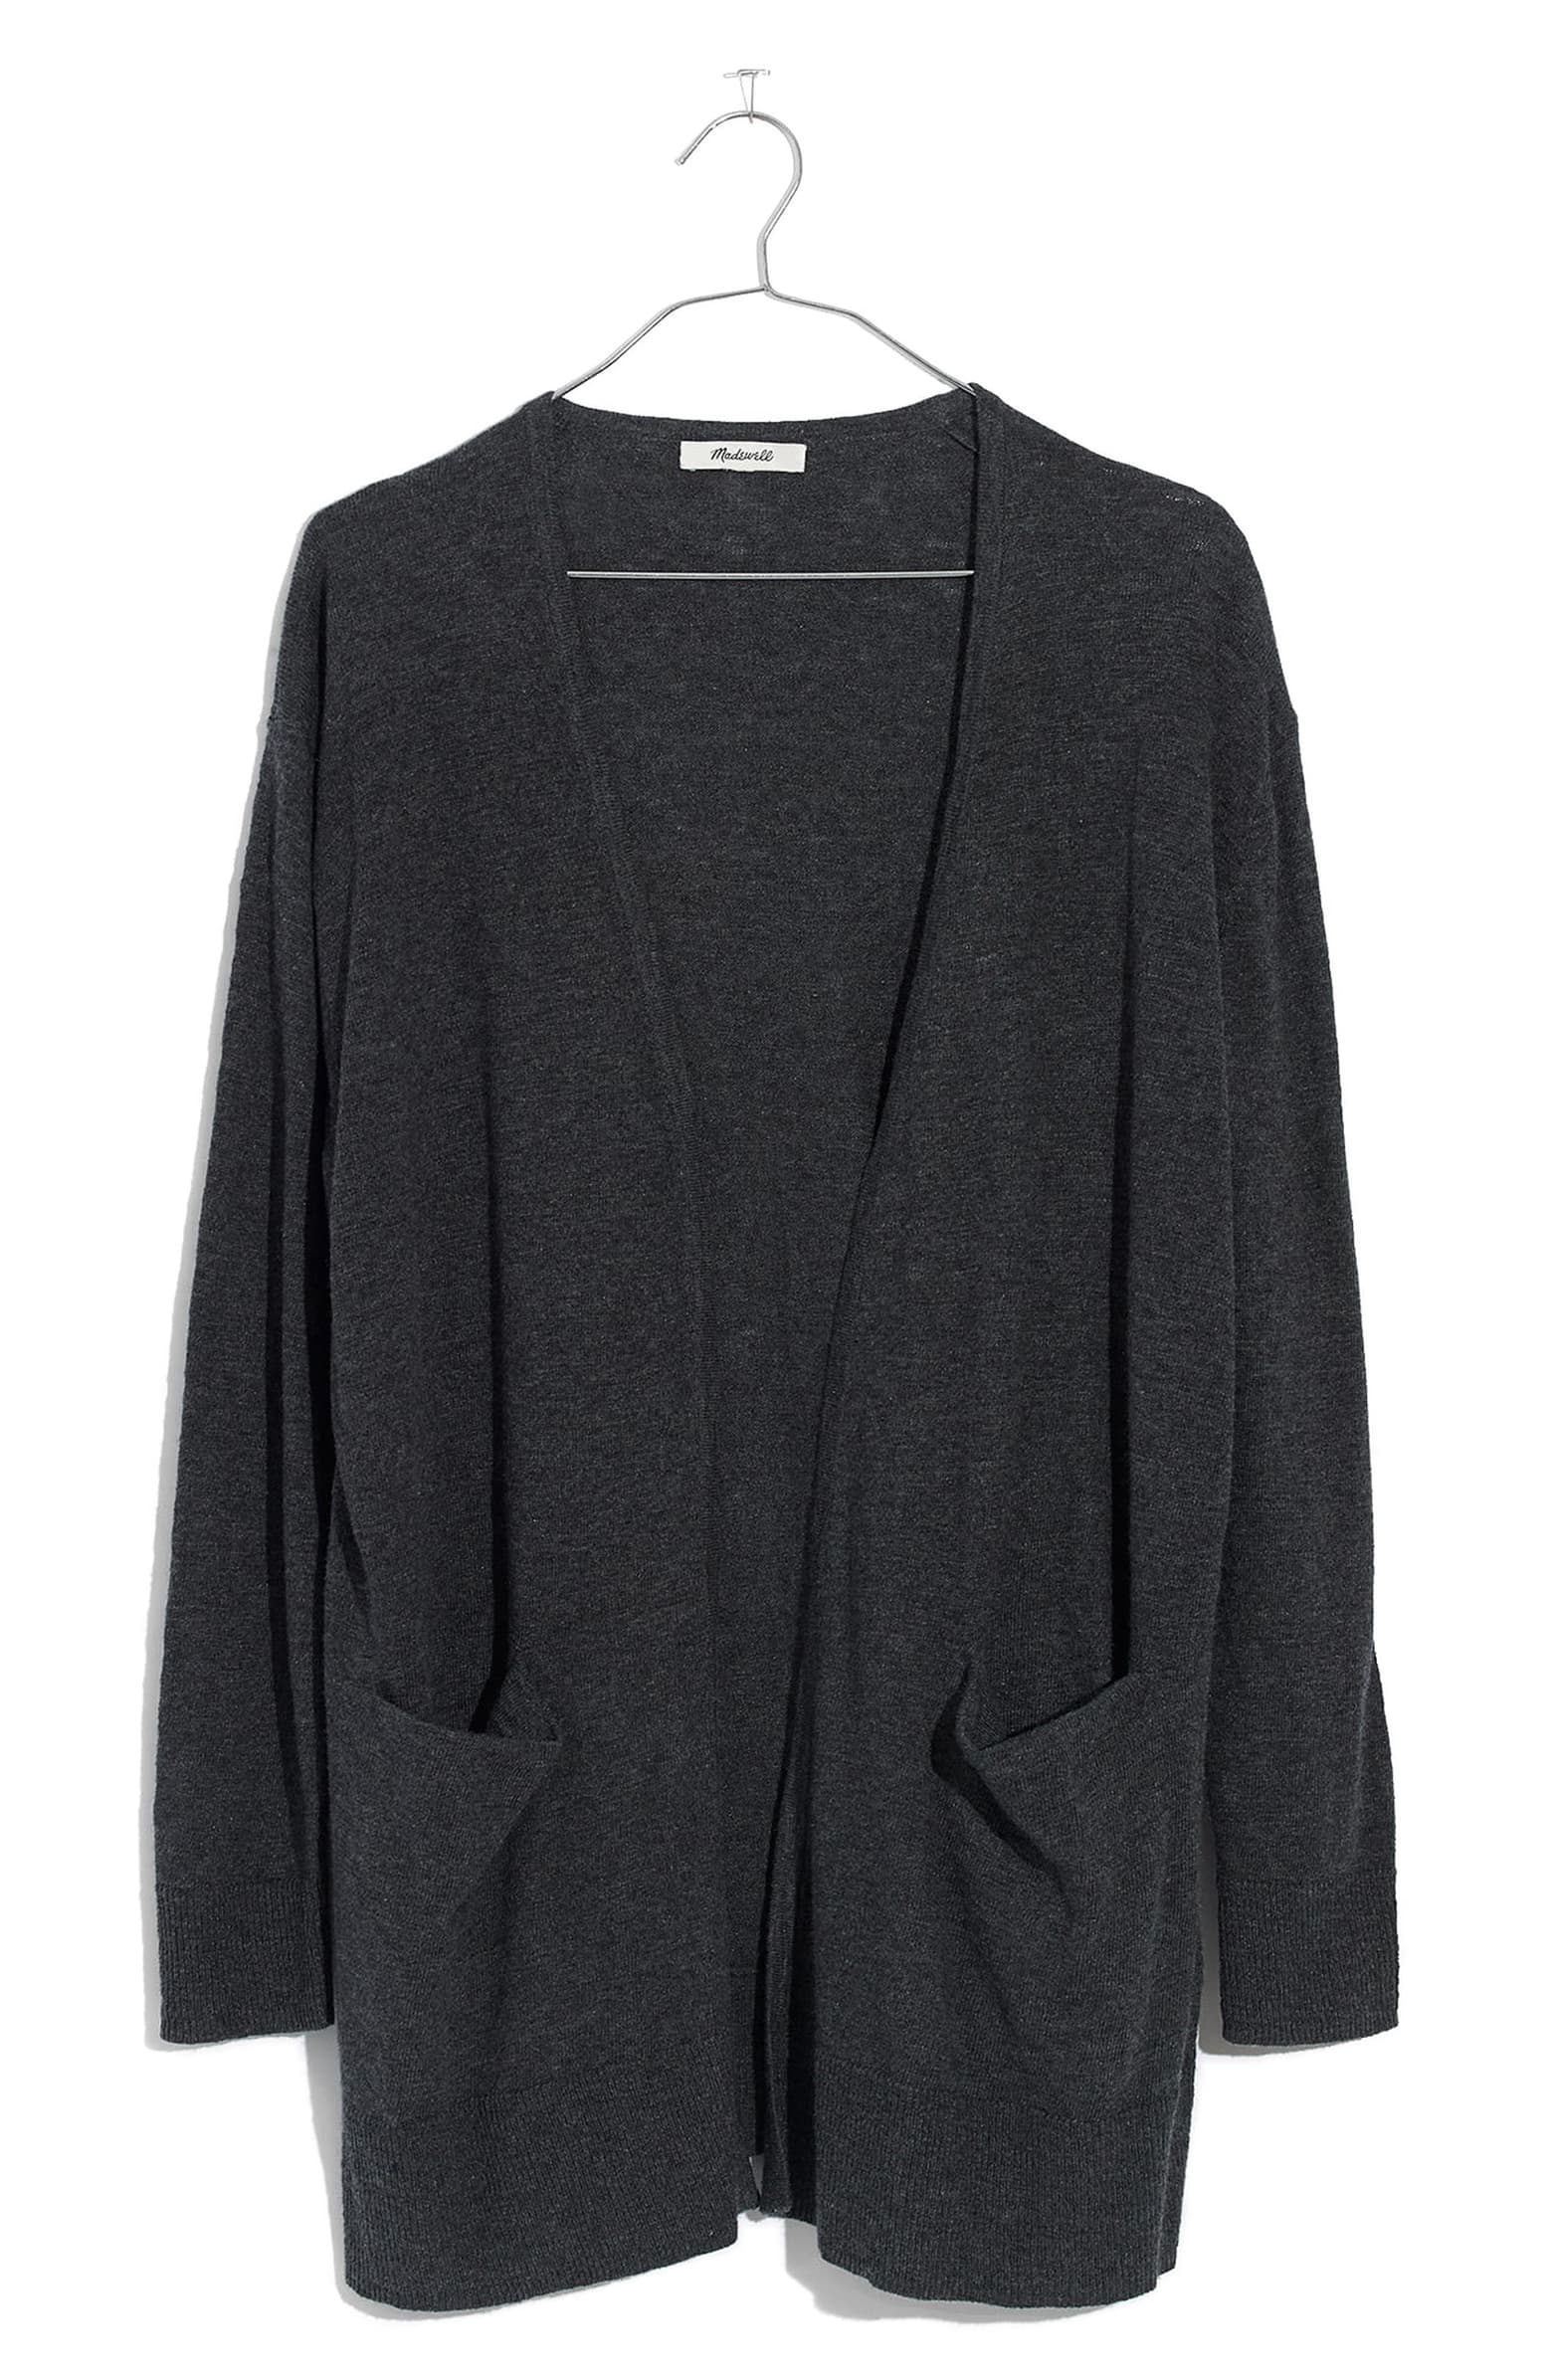 Score This Madewell Cardigan While It’s On Sale For 50% Off–It’s ...